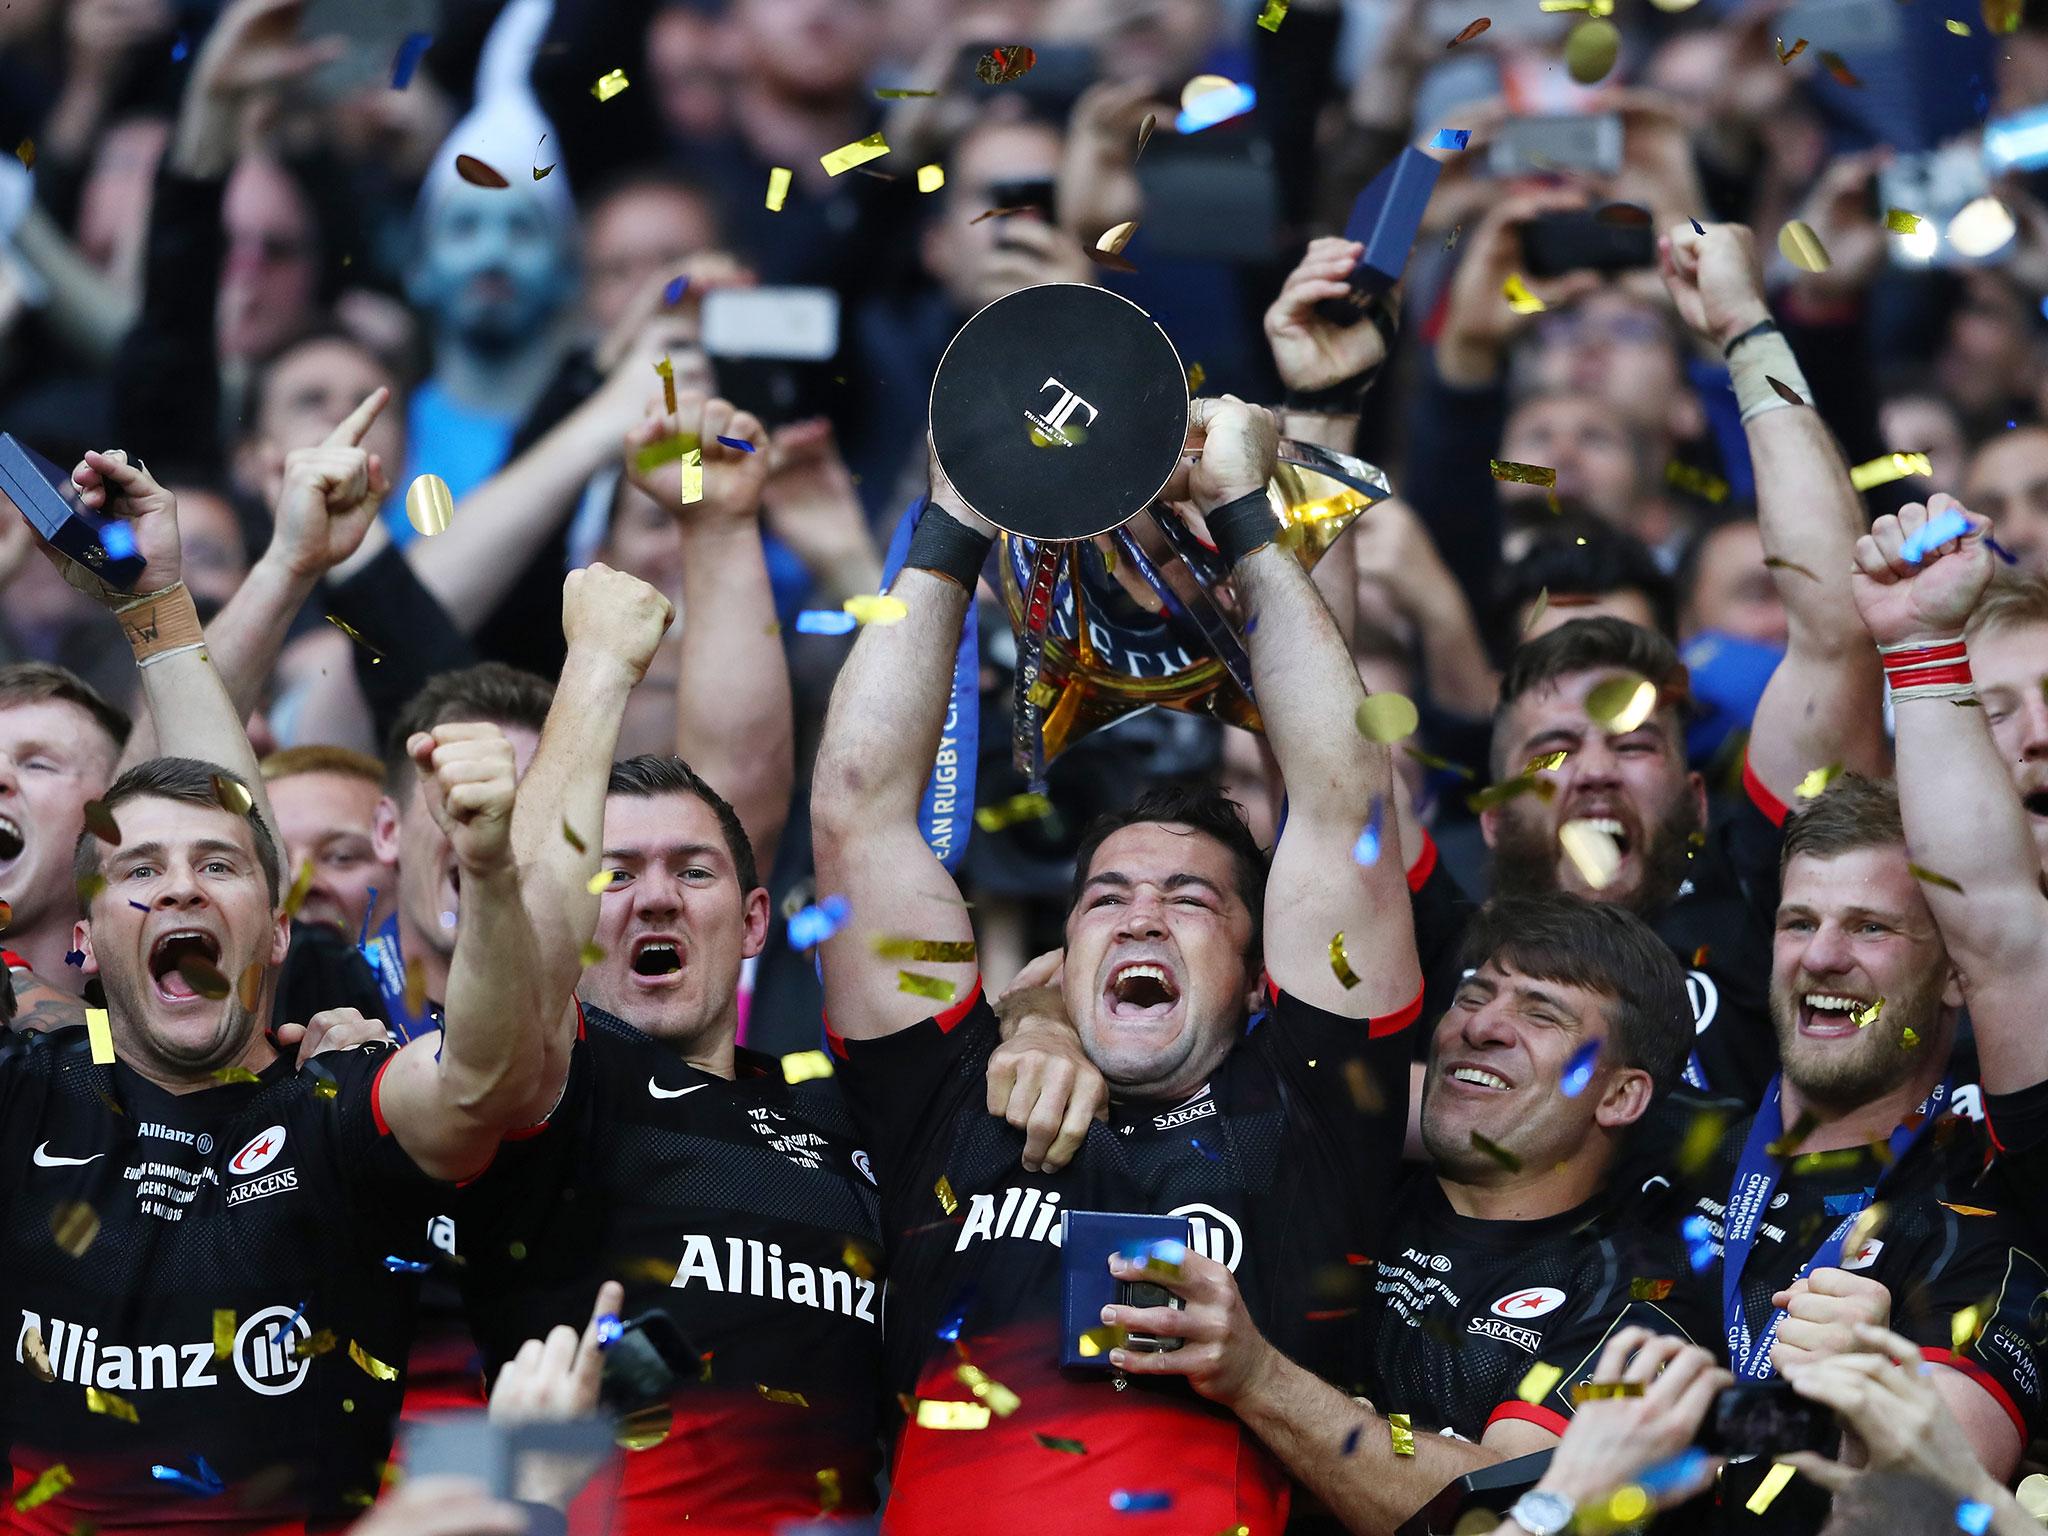 Saracens will have to win in either Dublin or Bordeaux to make the final if they see off Glasgow this weekend